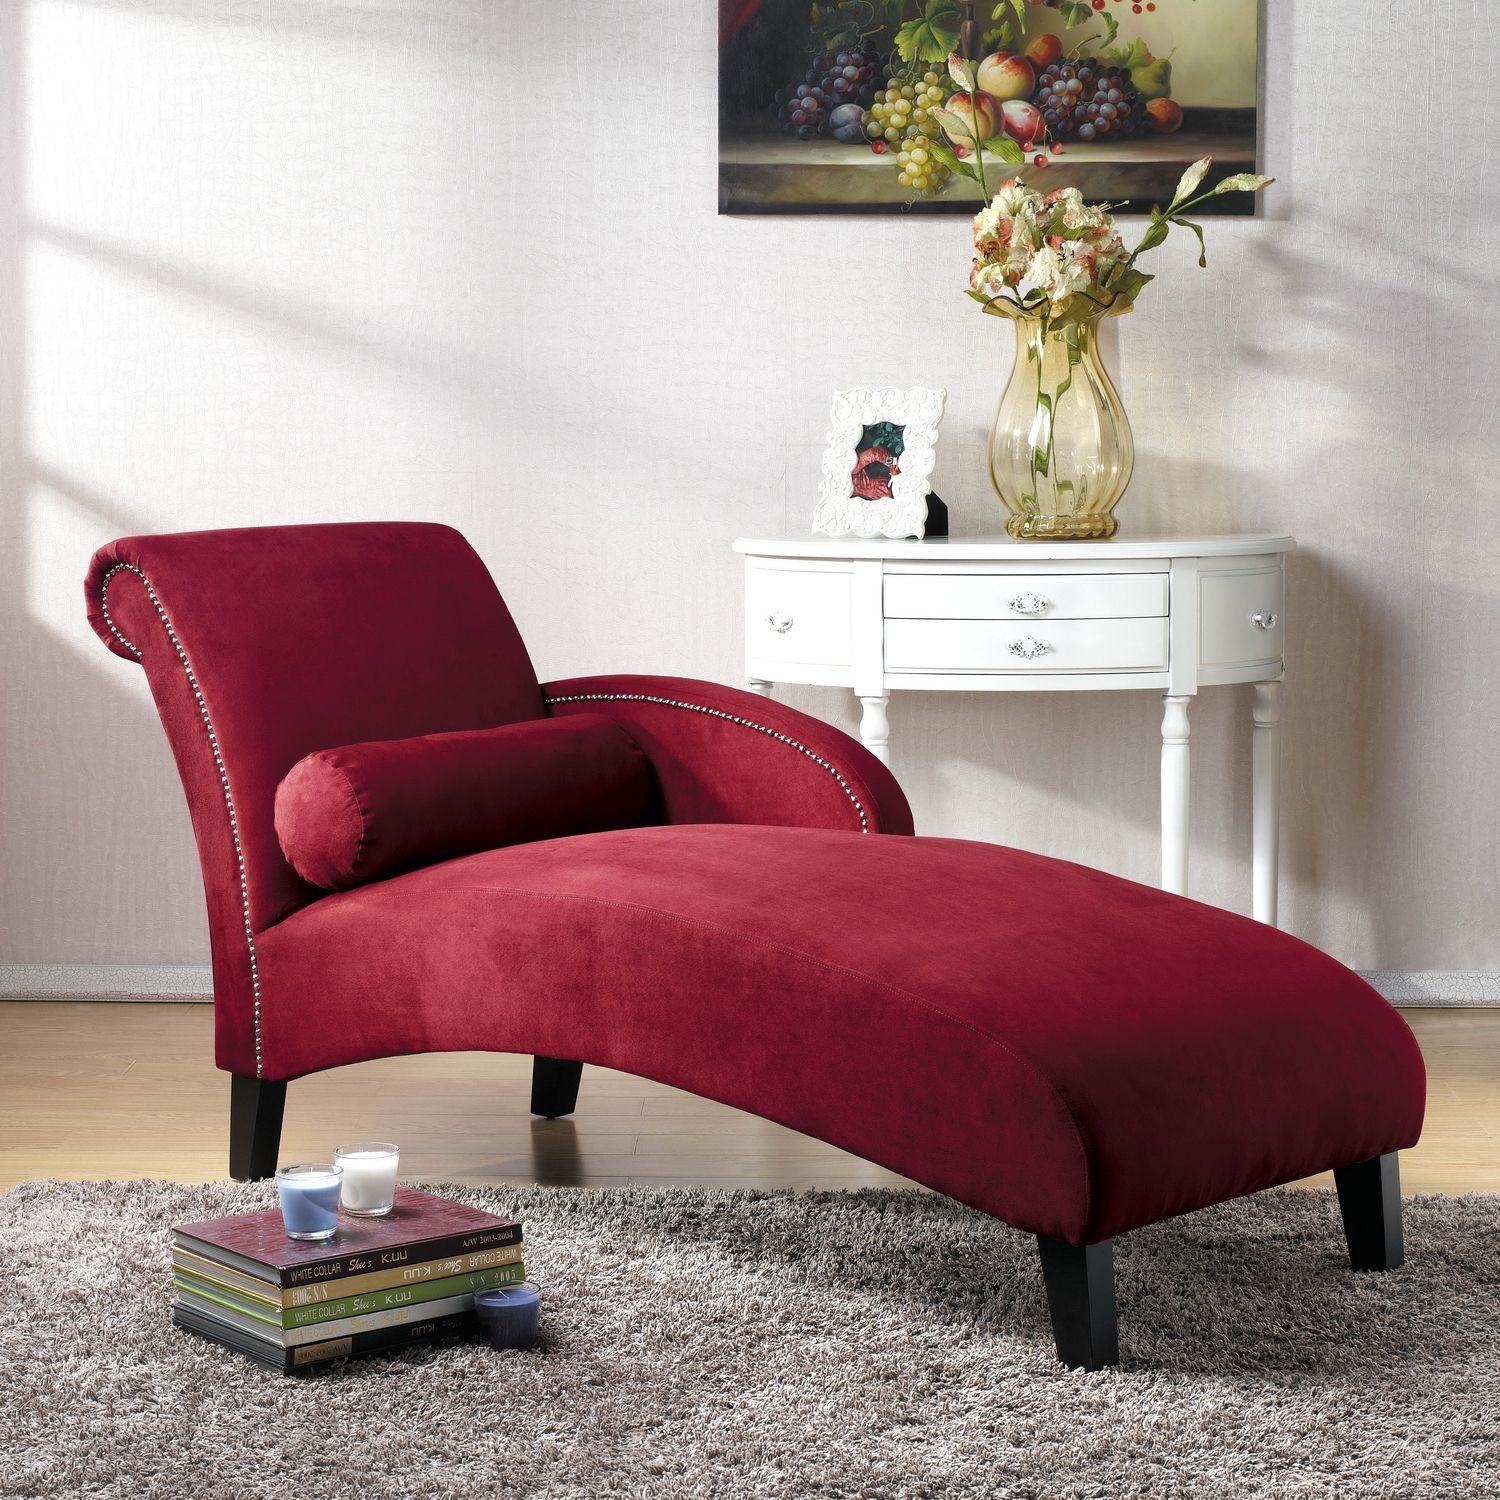 Red chaise lounges 17